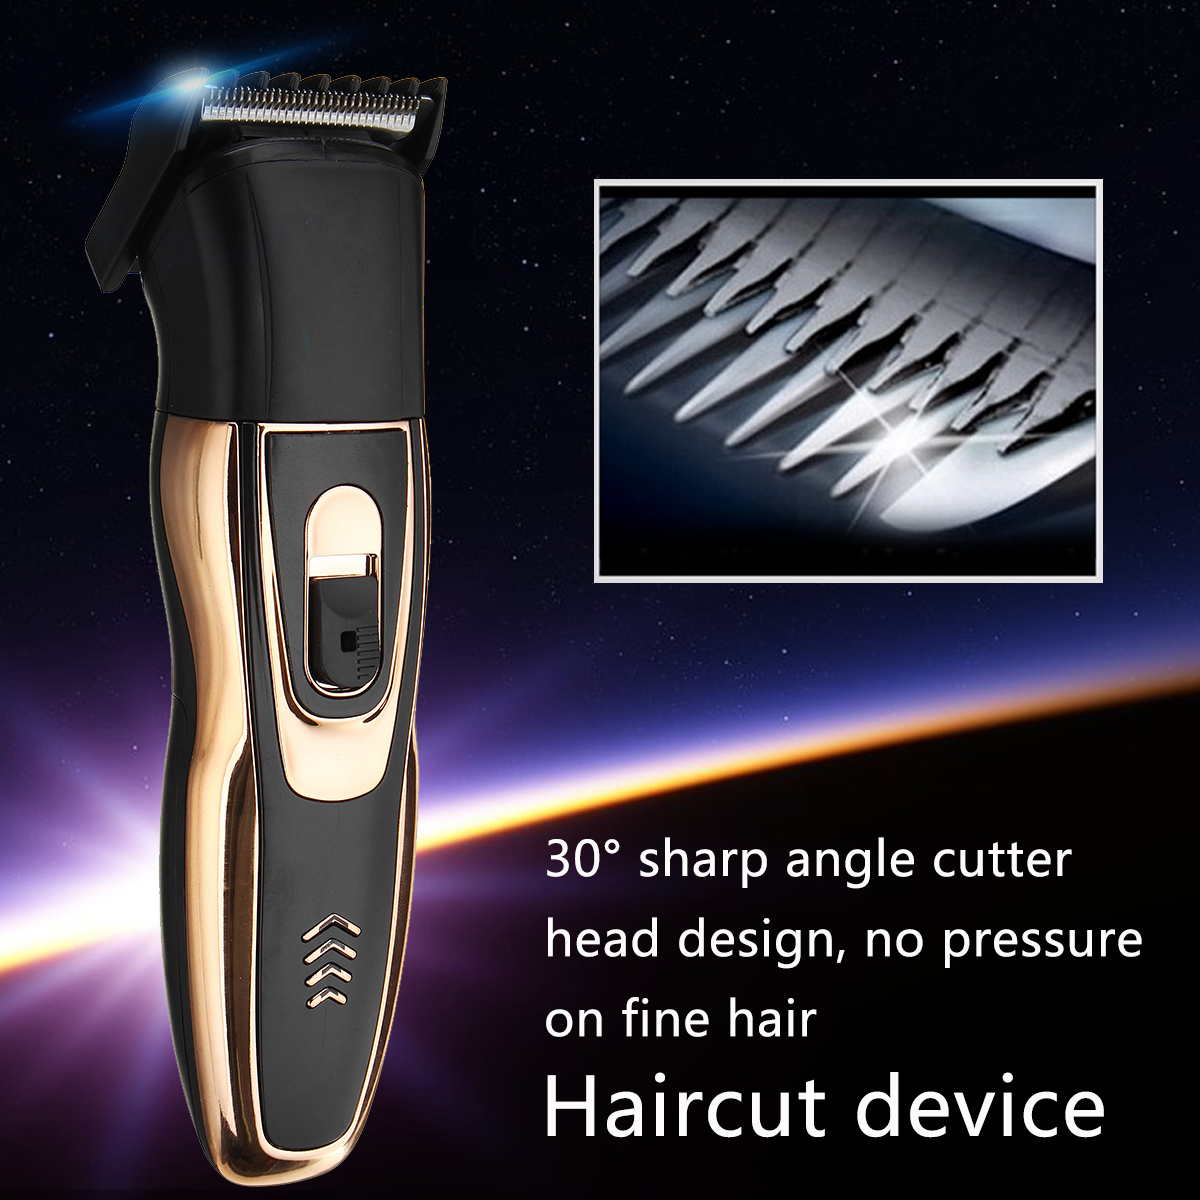 3-in-1-Electric-Razor-Rechargeable-Mens-Electric-Shaver-Grooming-Kit-Beard-Trimmer-Reciprocating-Hai-1417403